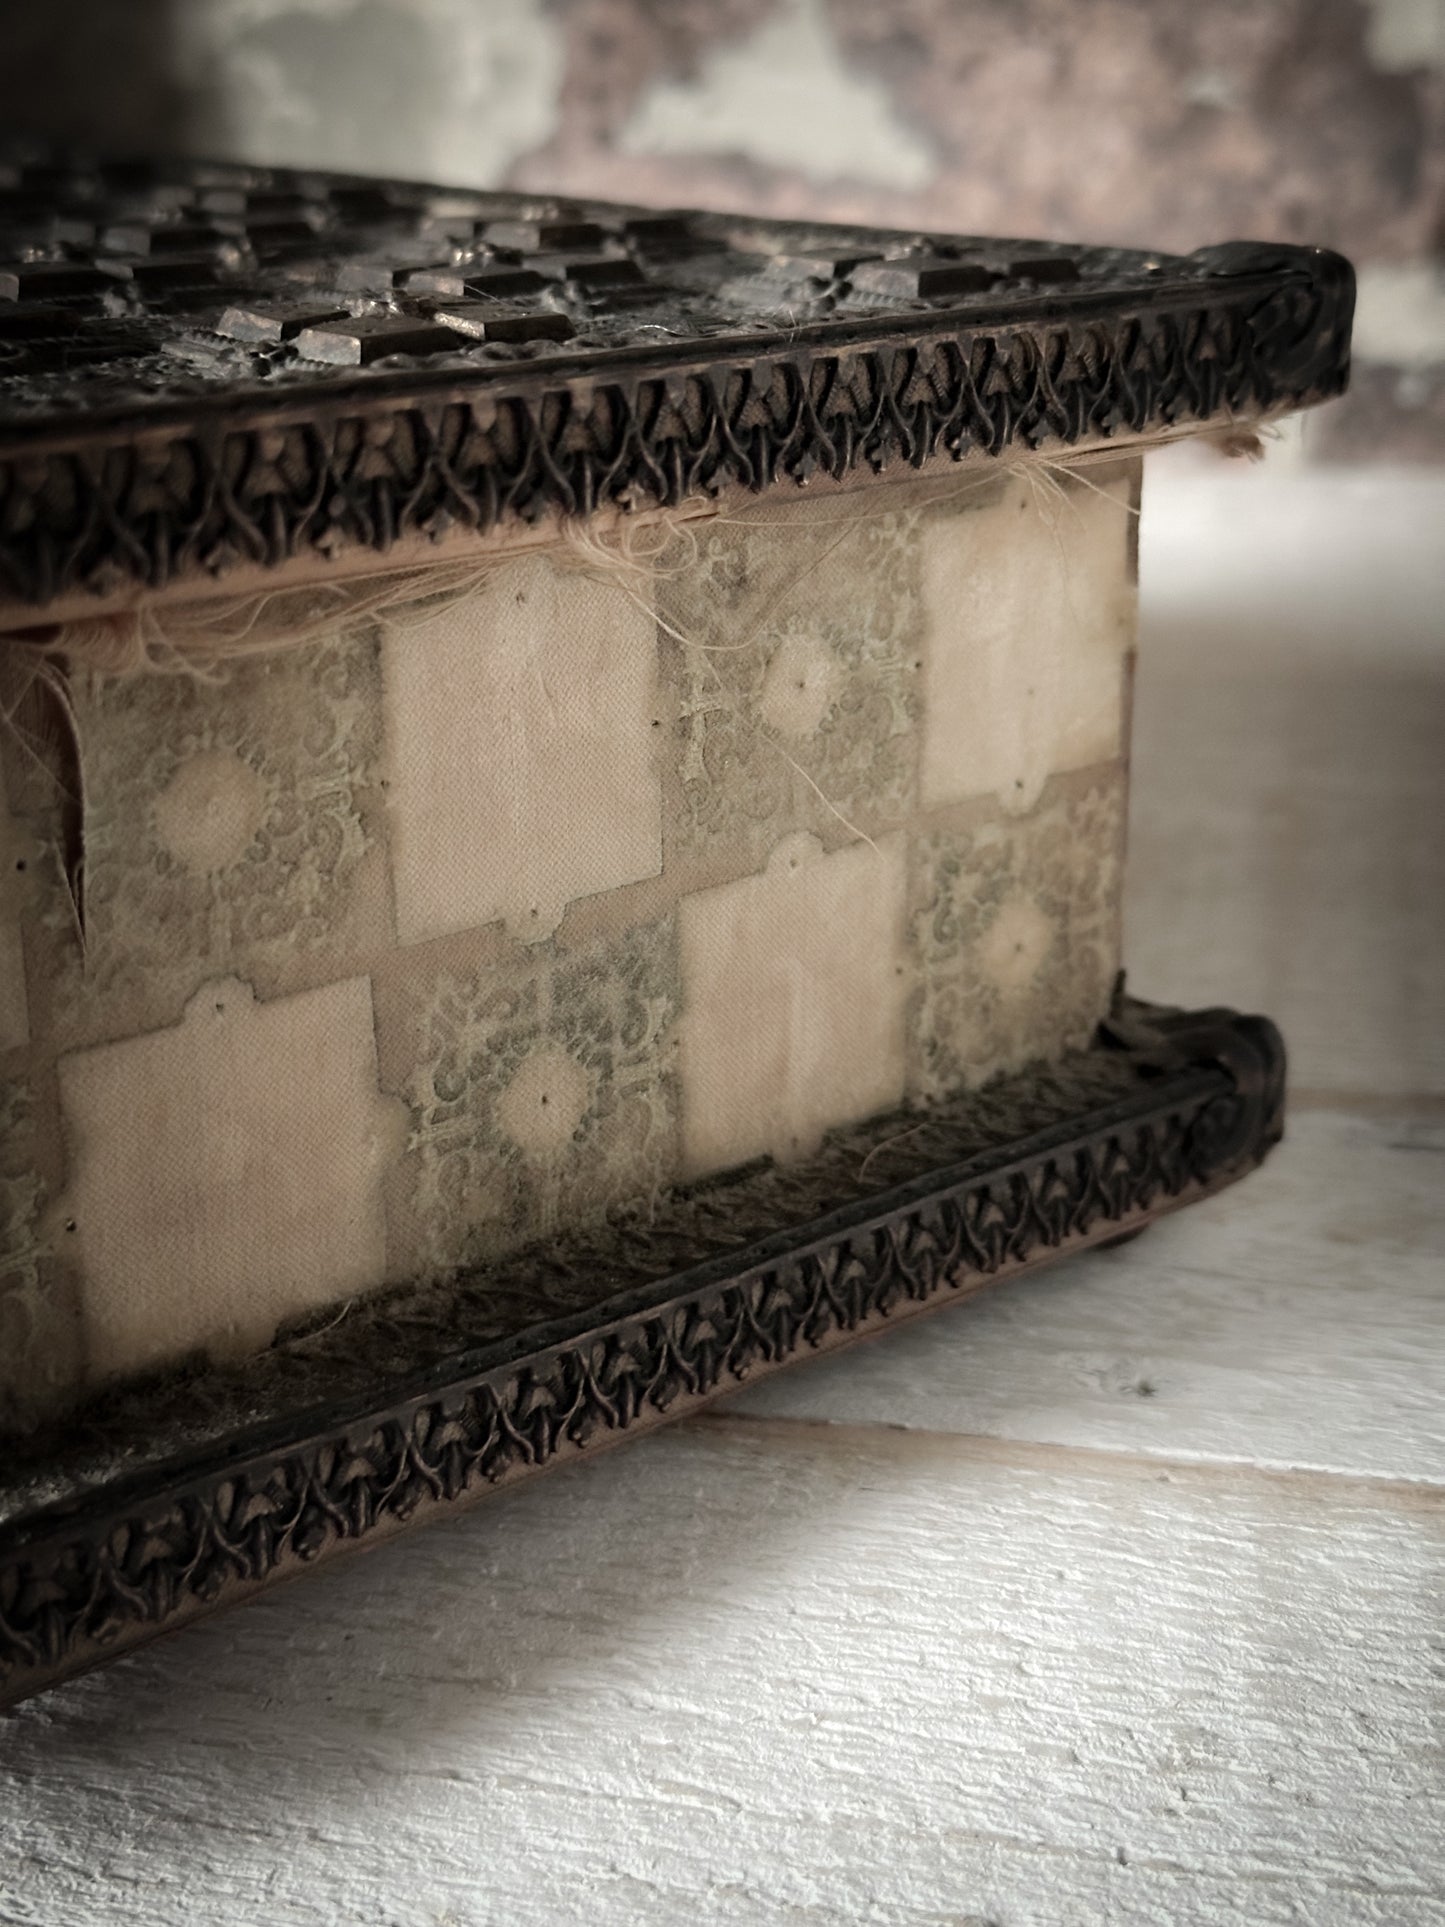 A curious, magical mystery box with medieval beaten metal lid and velvet trim